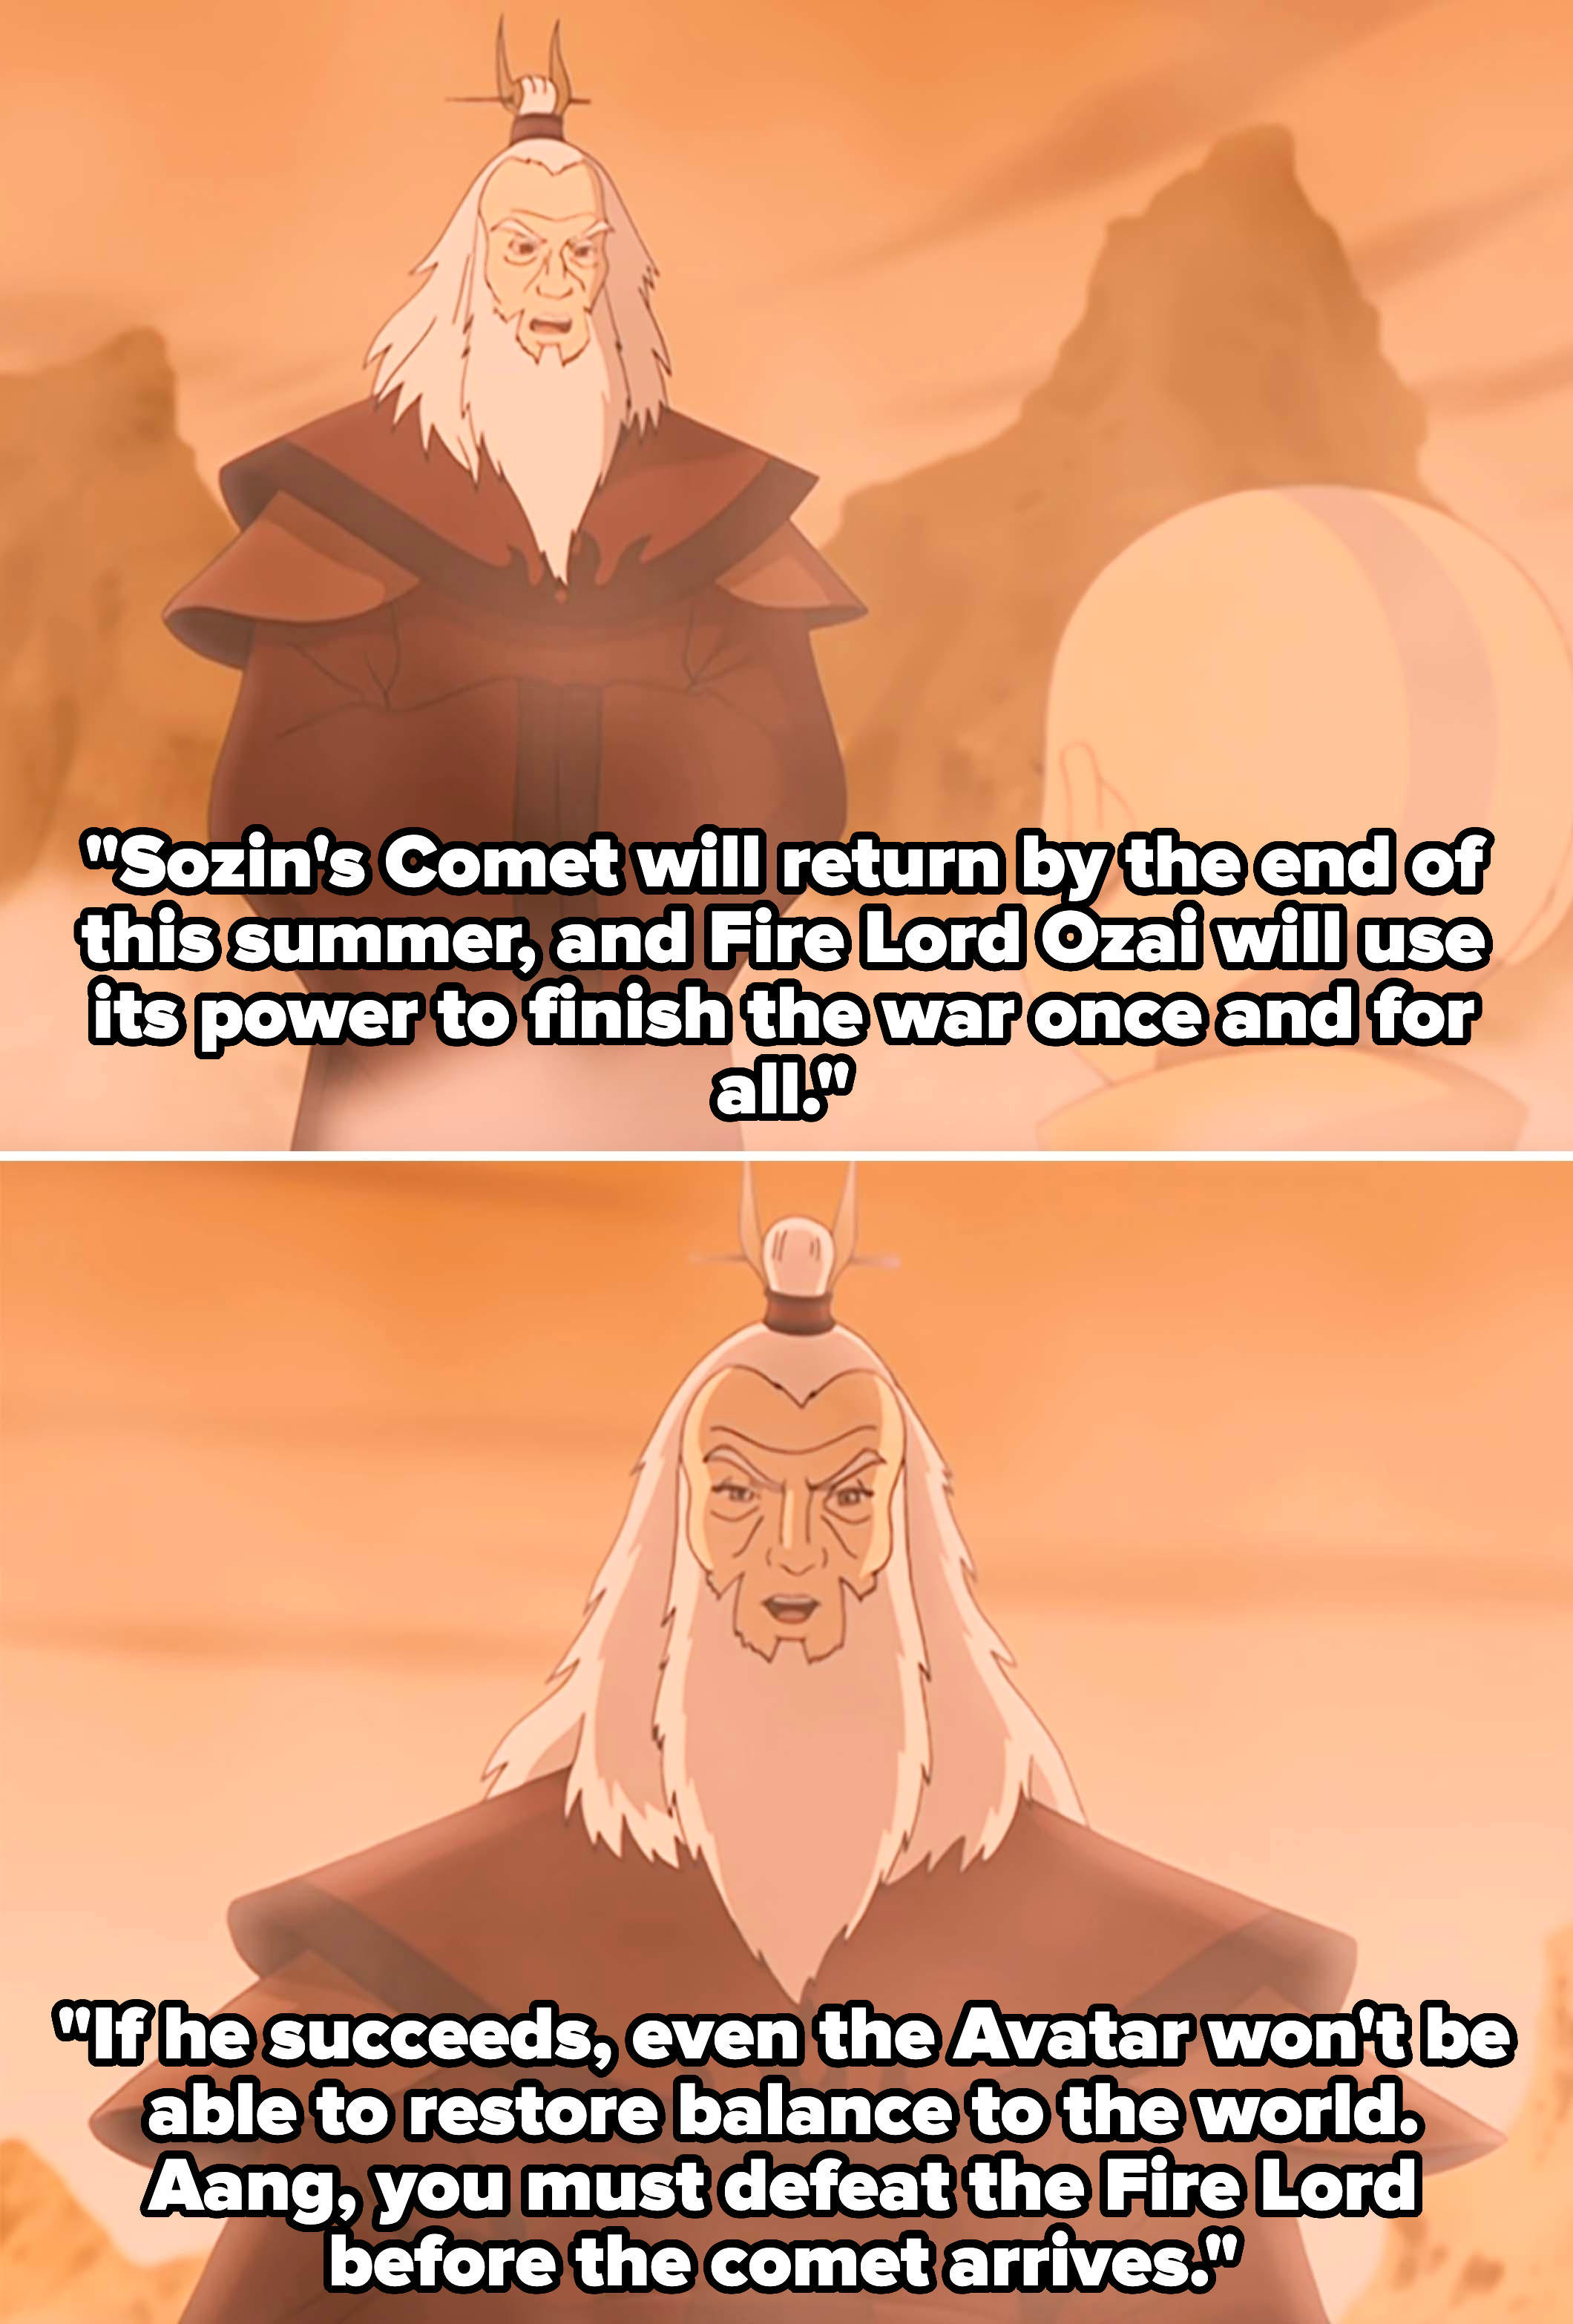 Animated characters Aang and Roku discussing Sozin&#x27;s comet coming back at the end of the summer